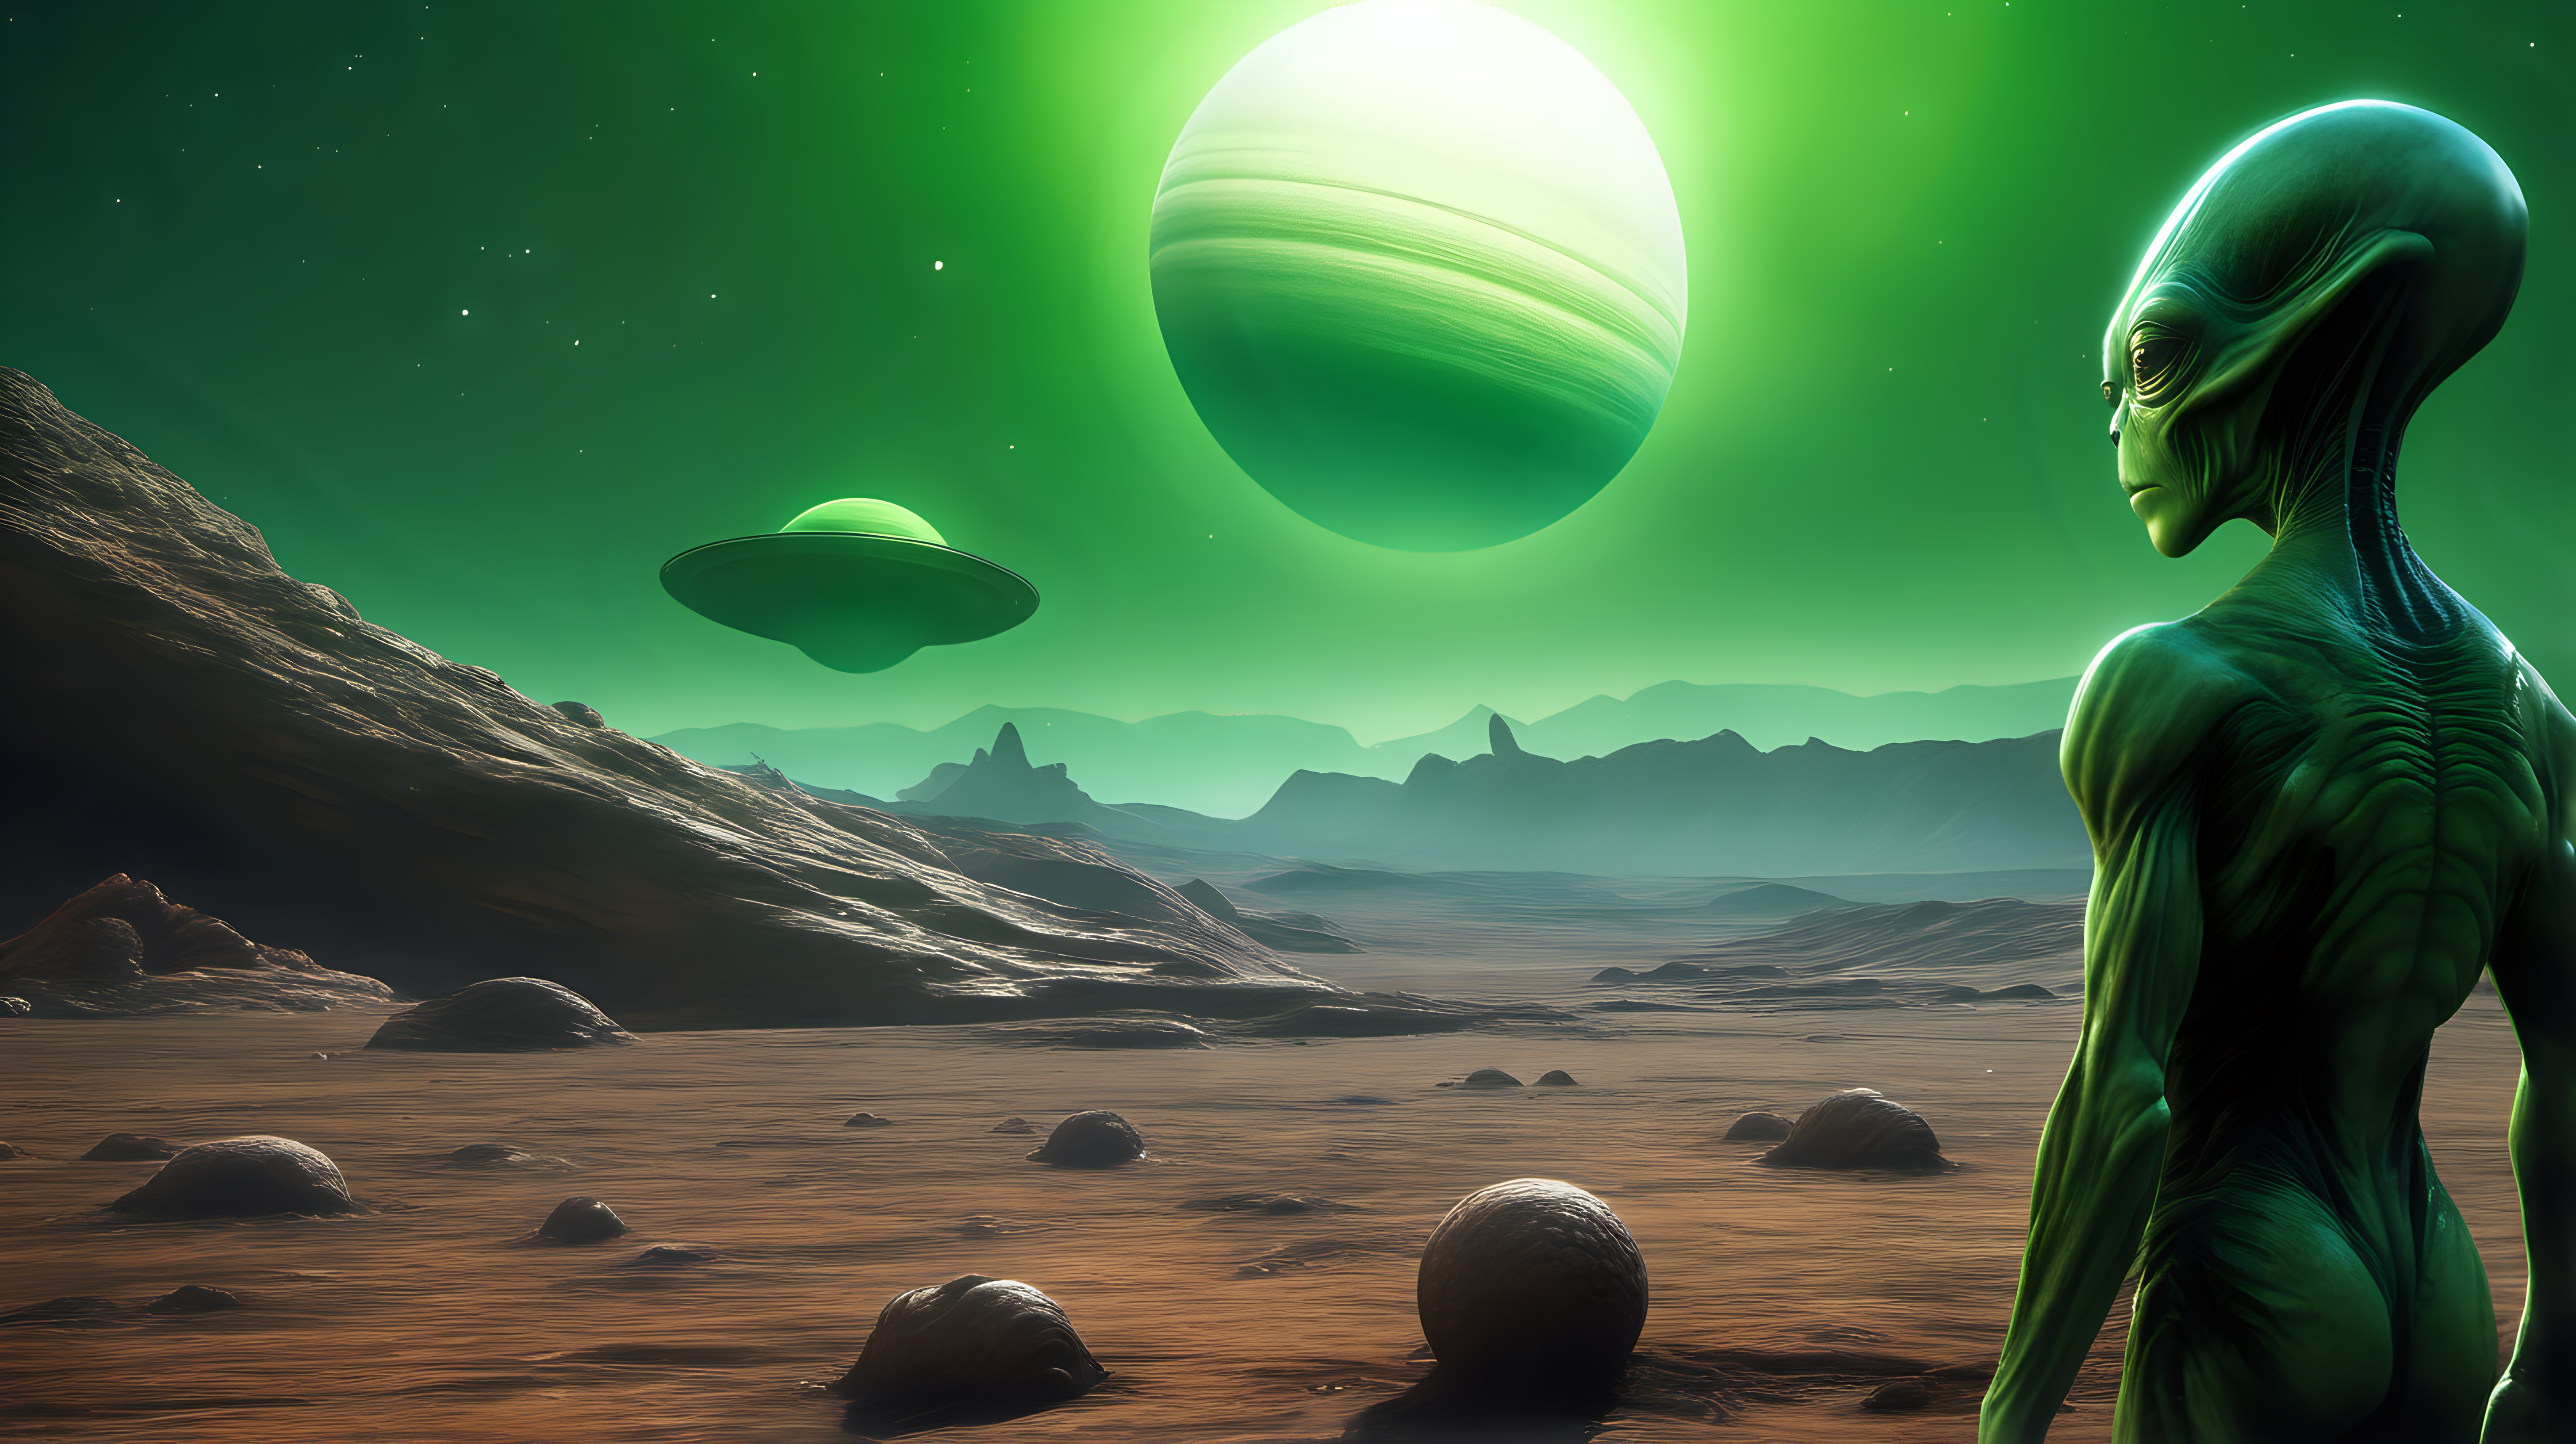 A green alien in the foreground on an